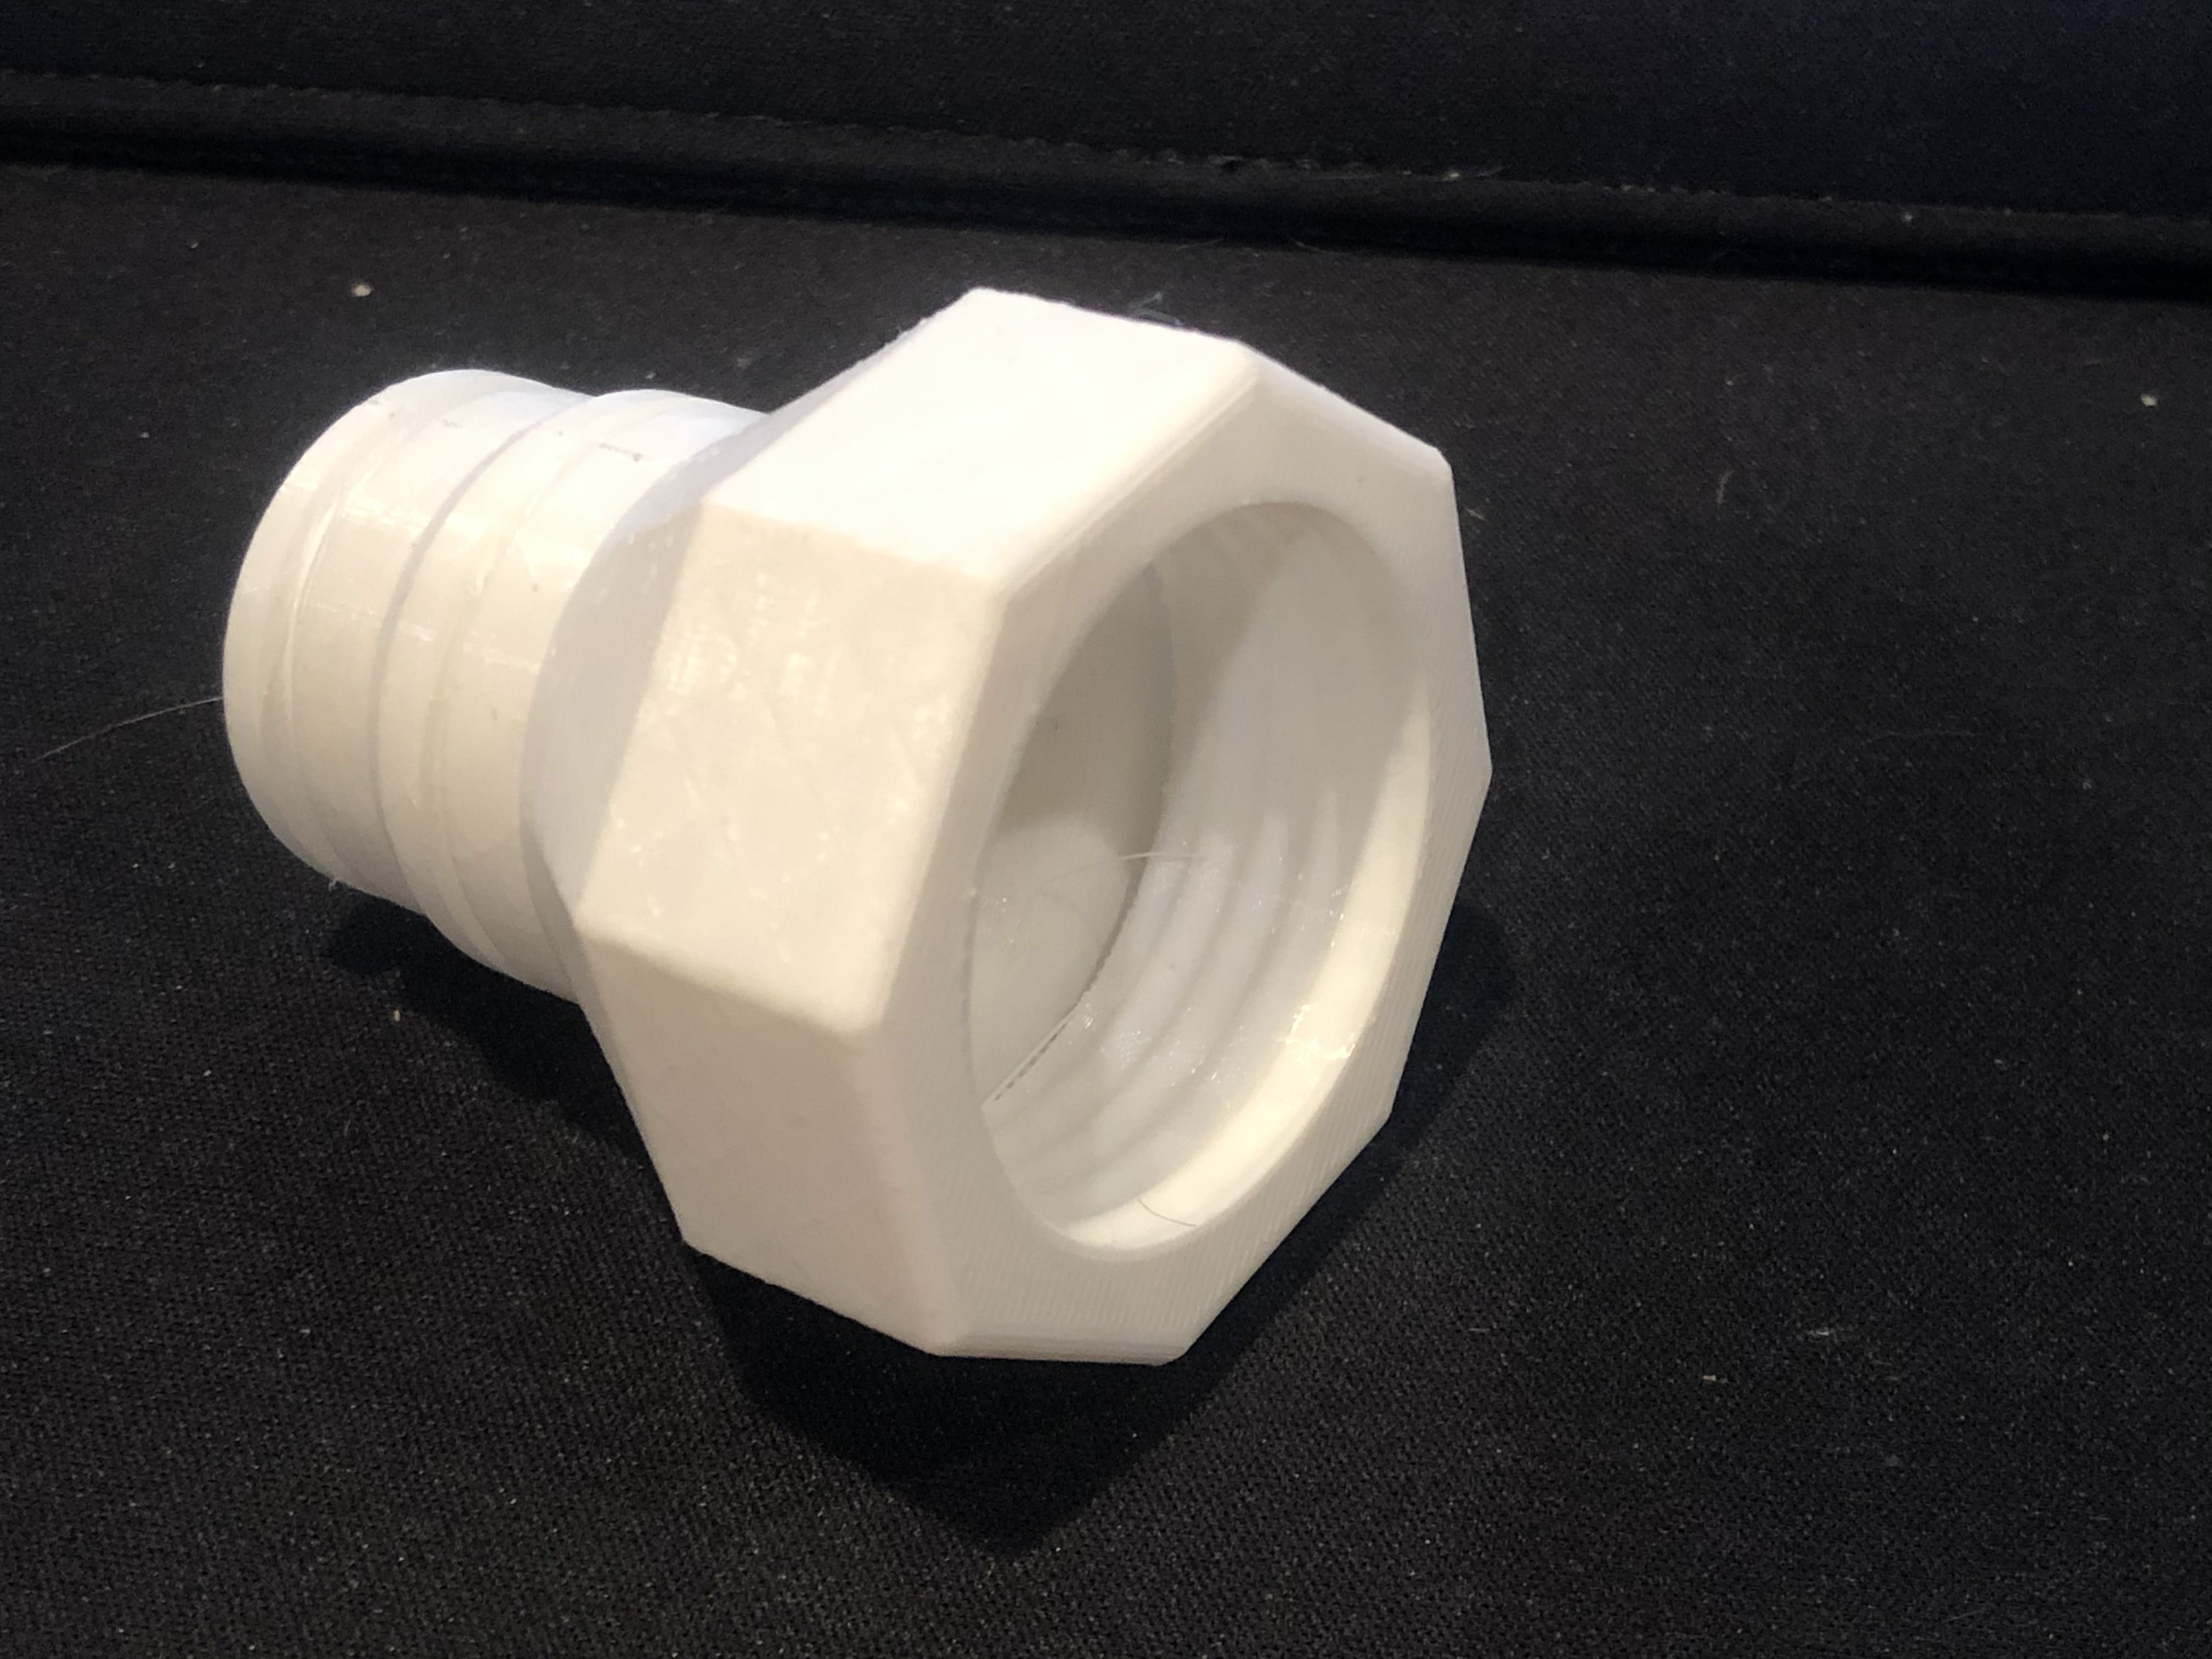 Prototype adapter printed in PLA